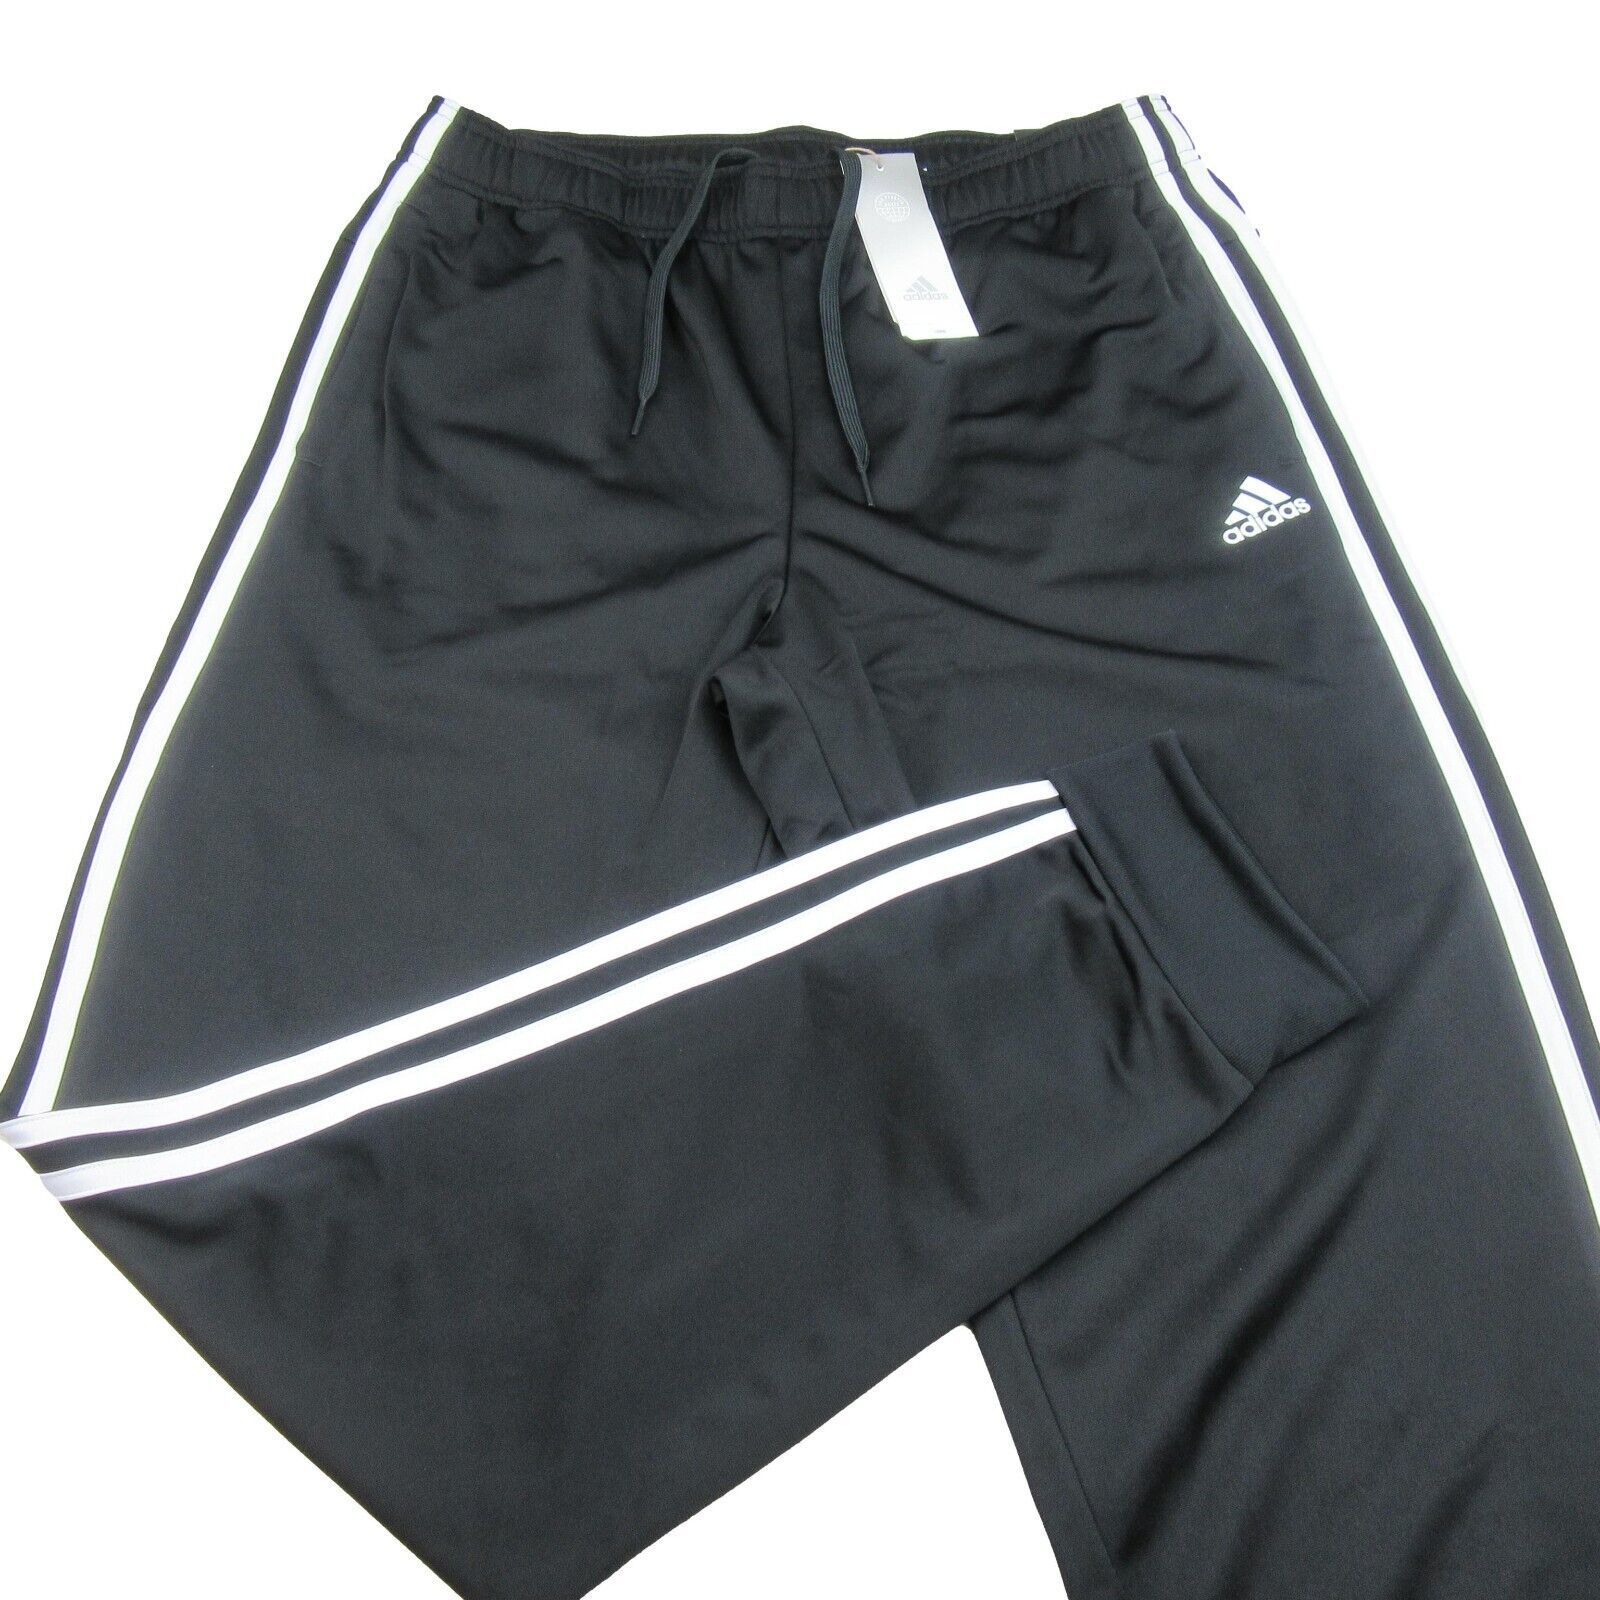 Primary image for Adidas Essentials Tapered 3-Stripes Jogger Pants Mens Size Large NEW H46105